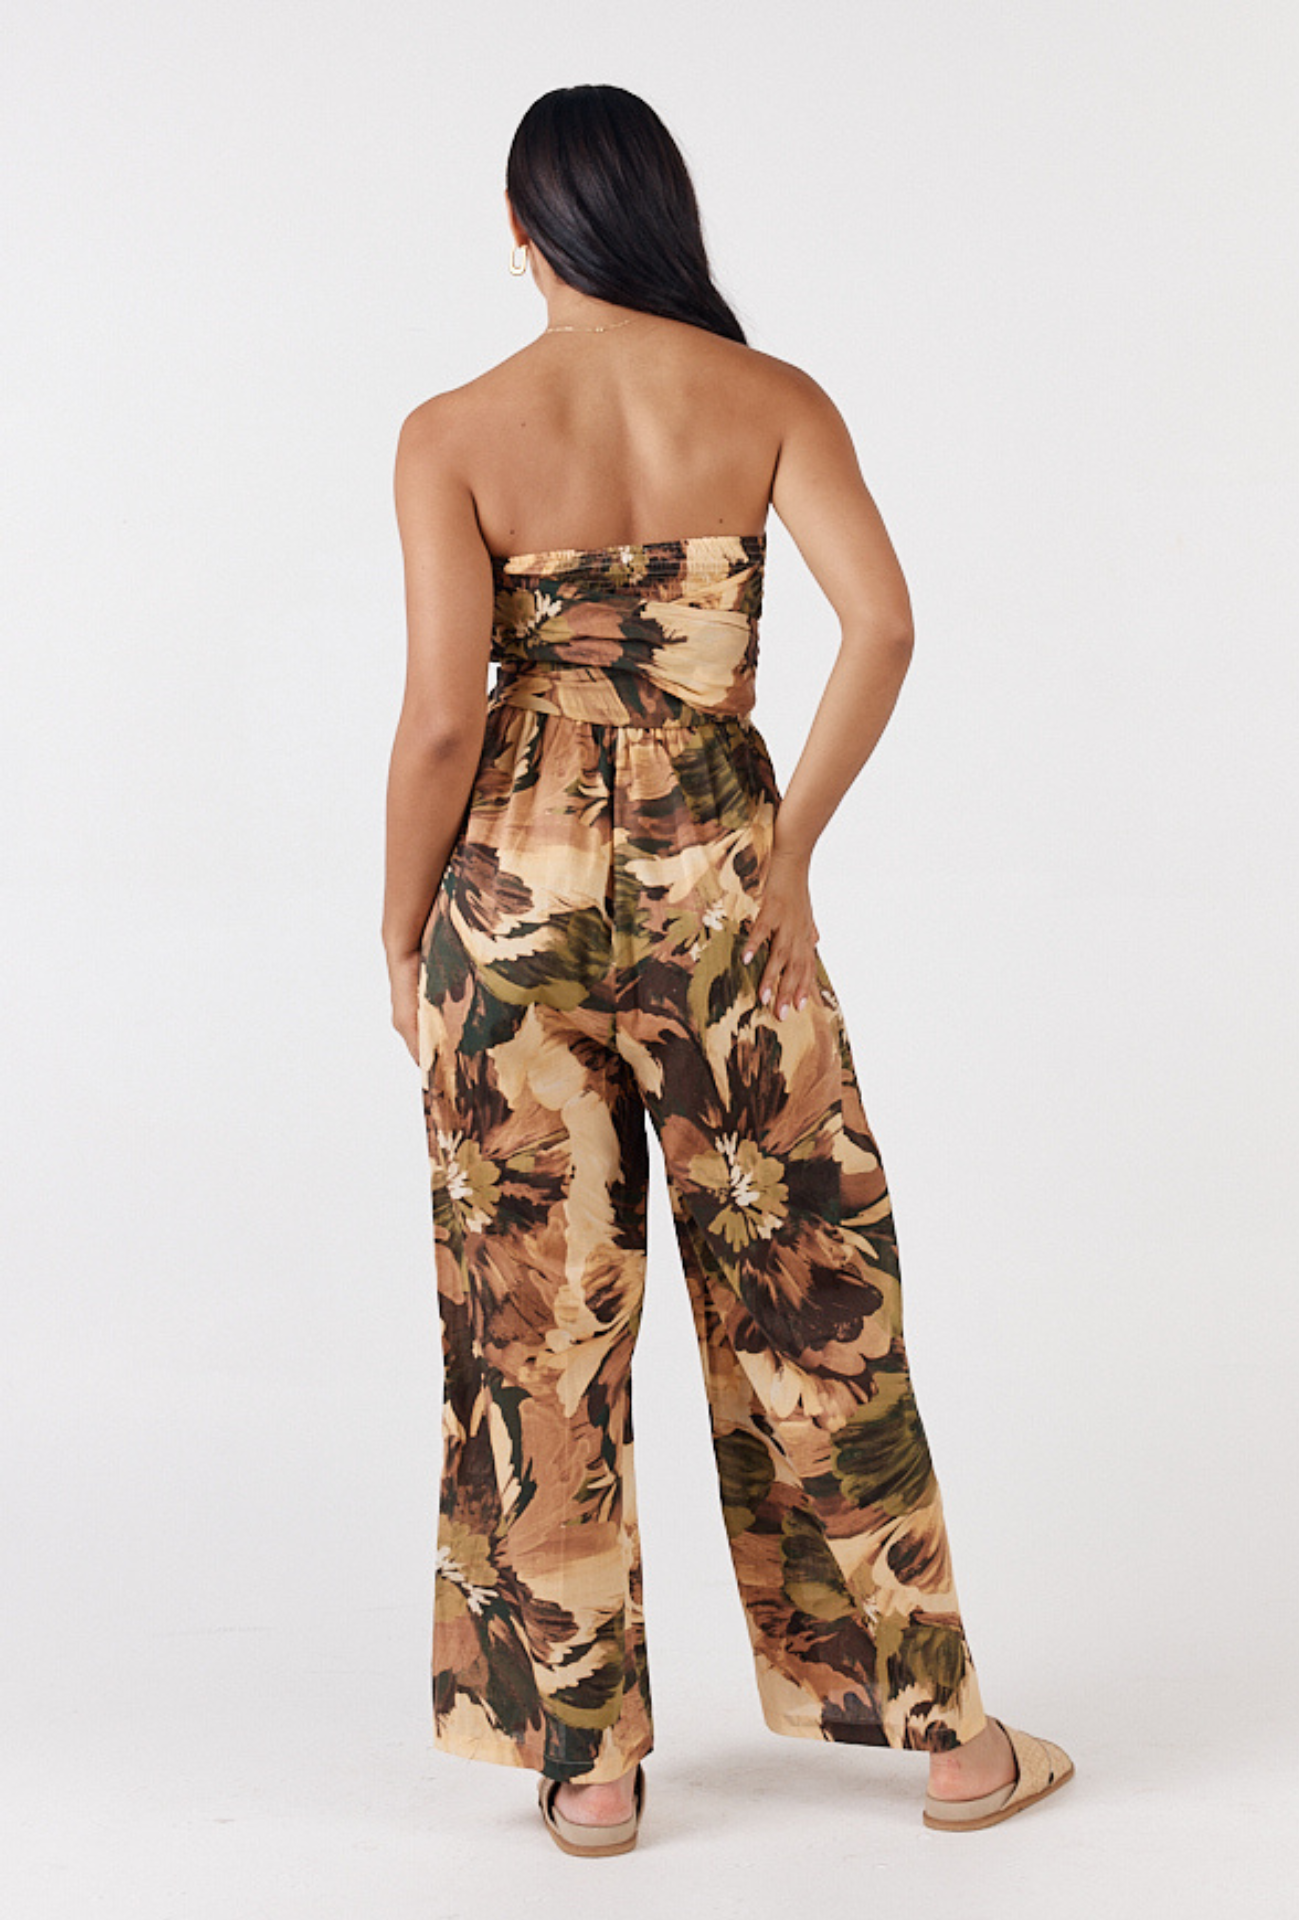 WATERFRONT PLAYSUIT - WILD FOREST PRINT